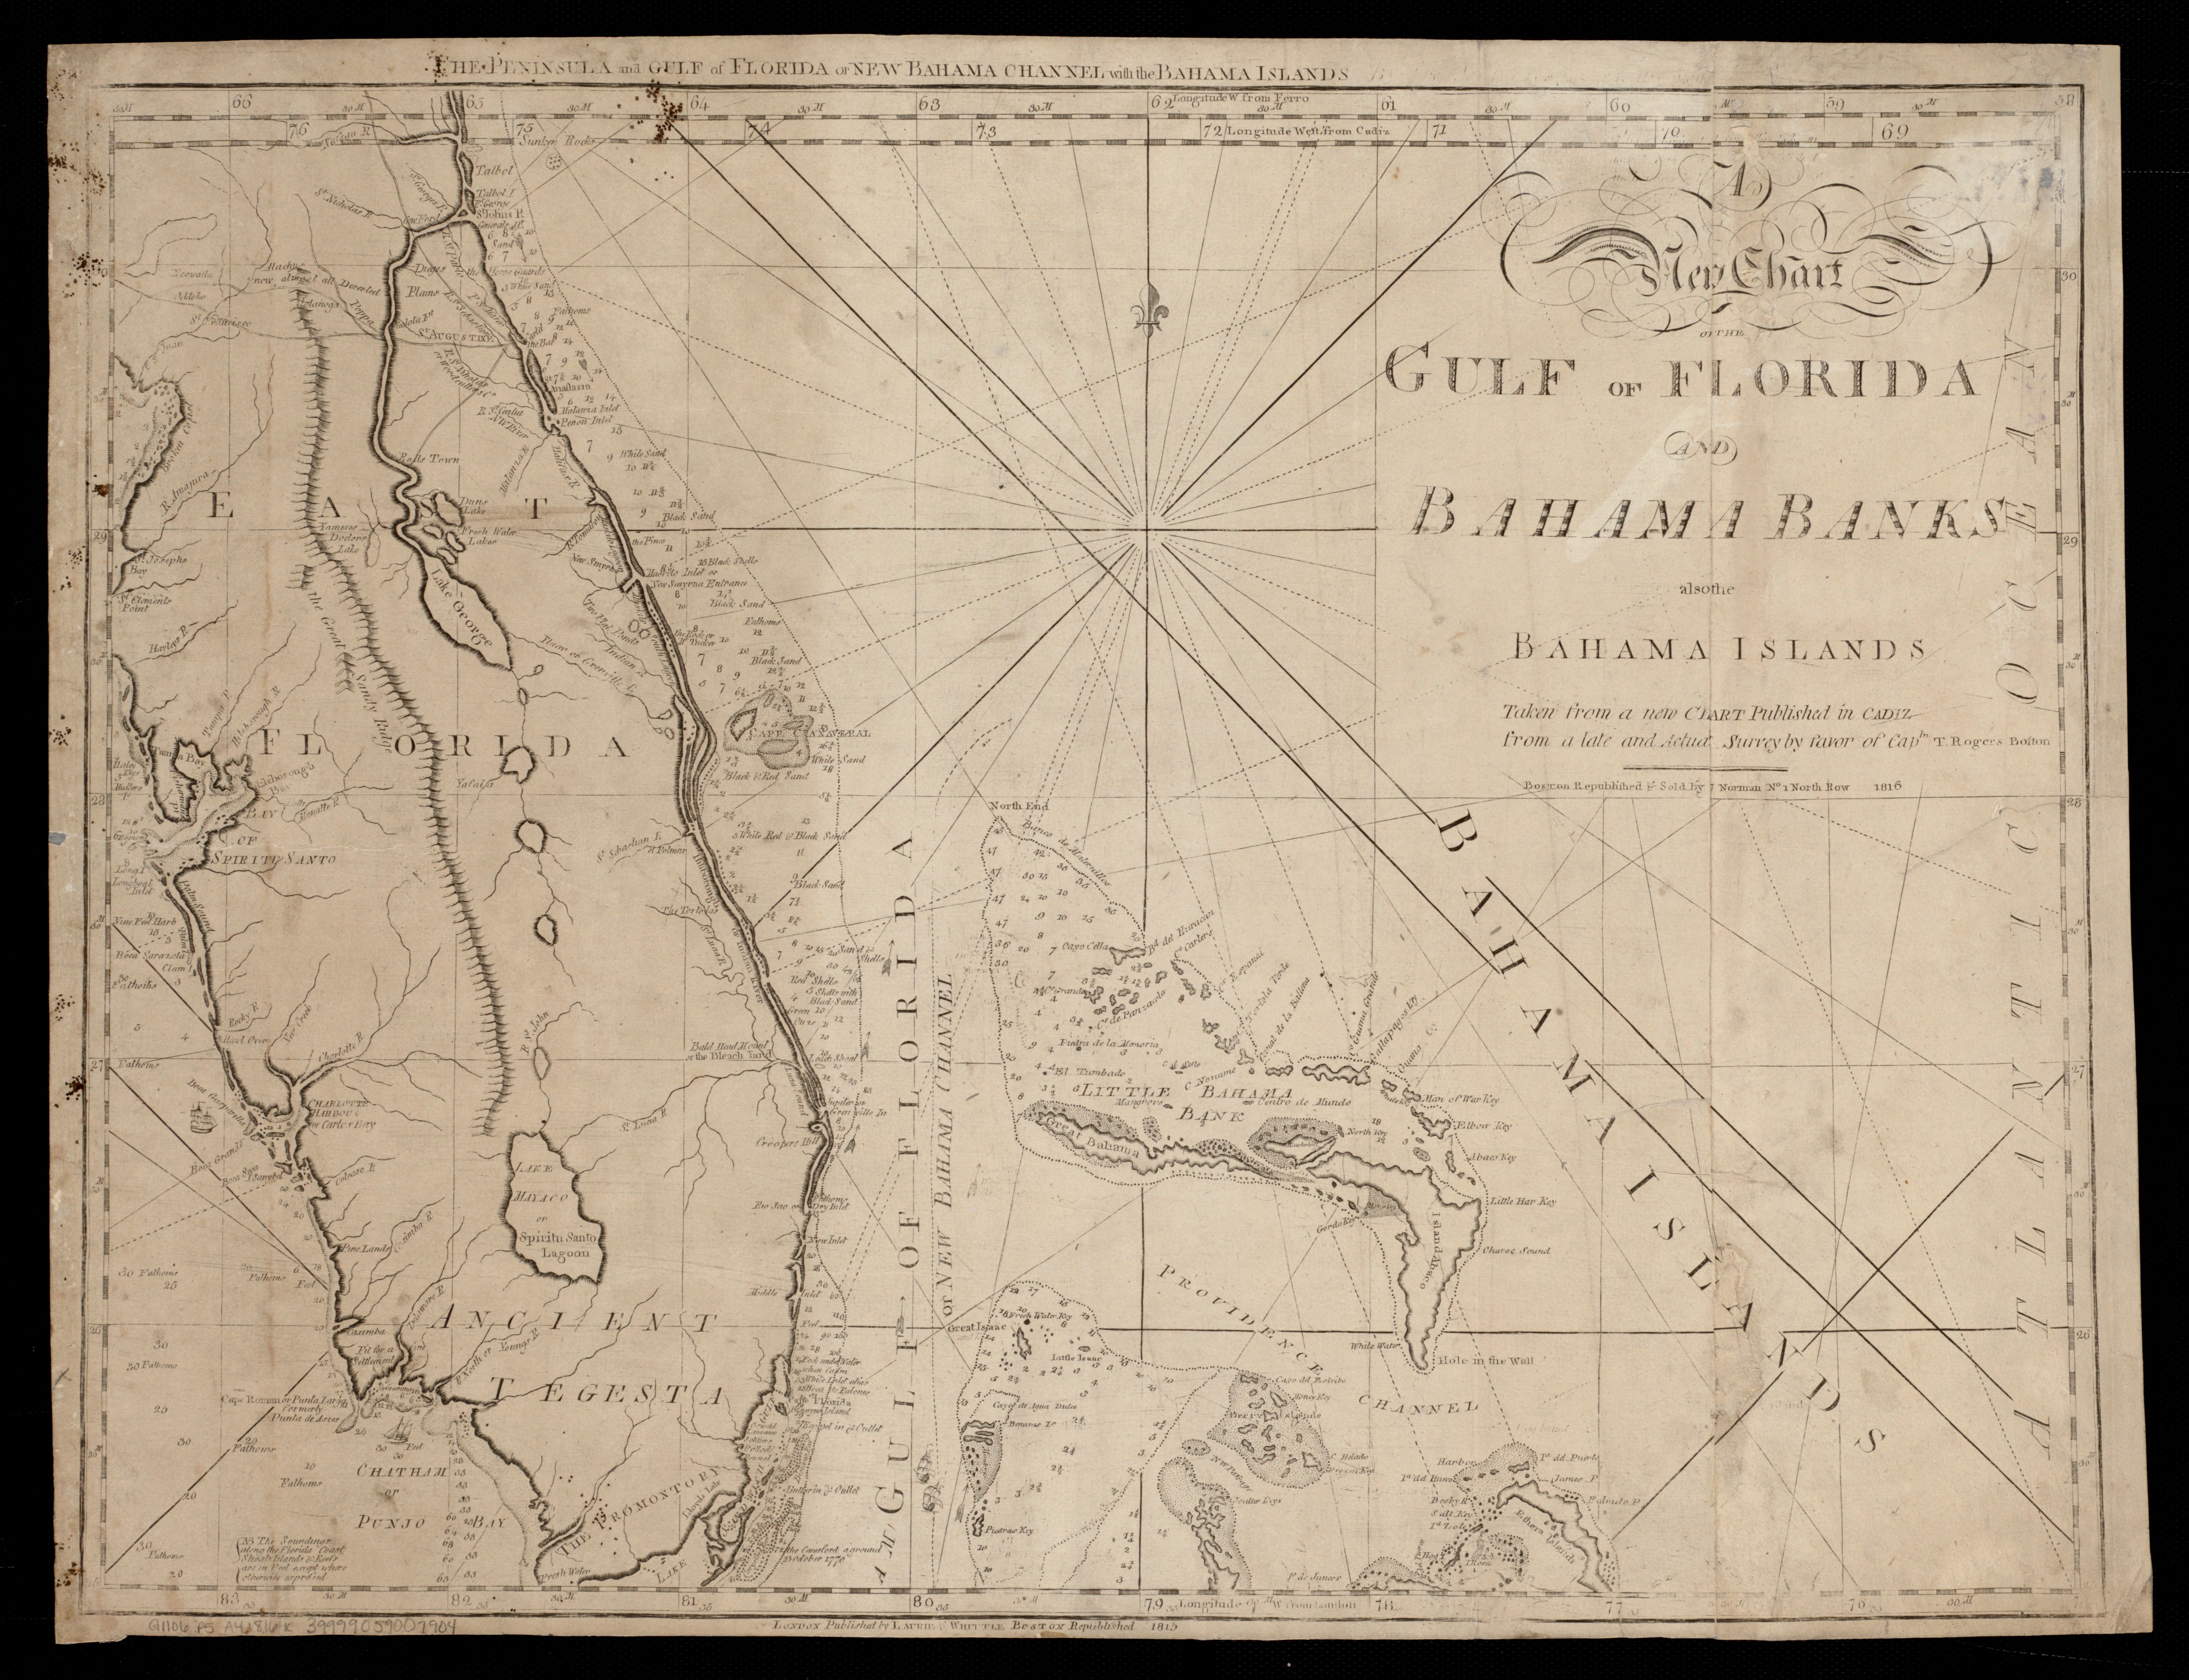 Map of Golf of Florida and Bahama Banks published in 1816 by favor of Captn. T. Rogers